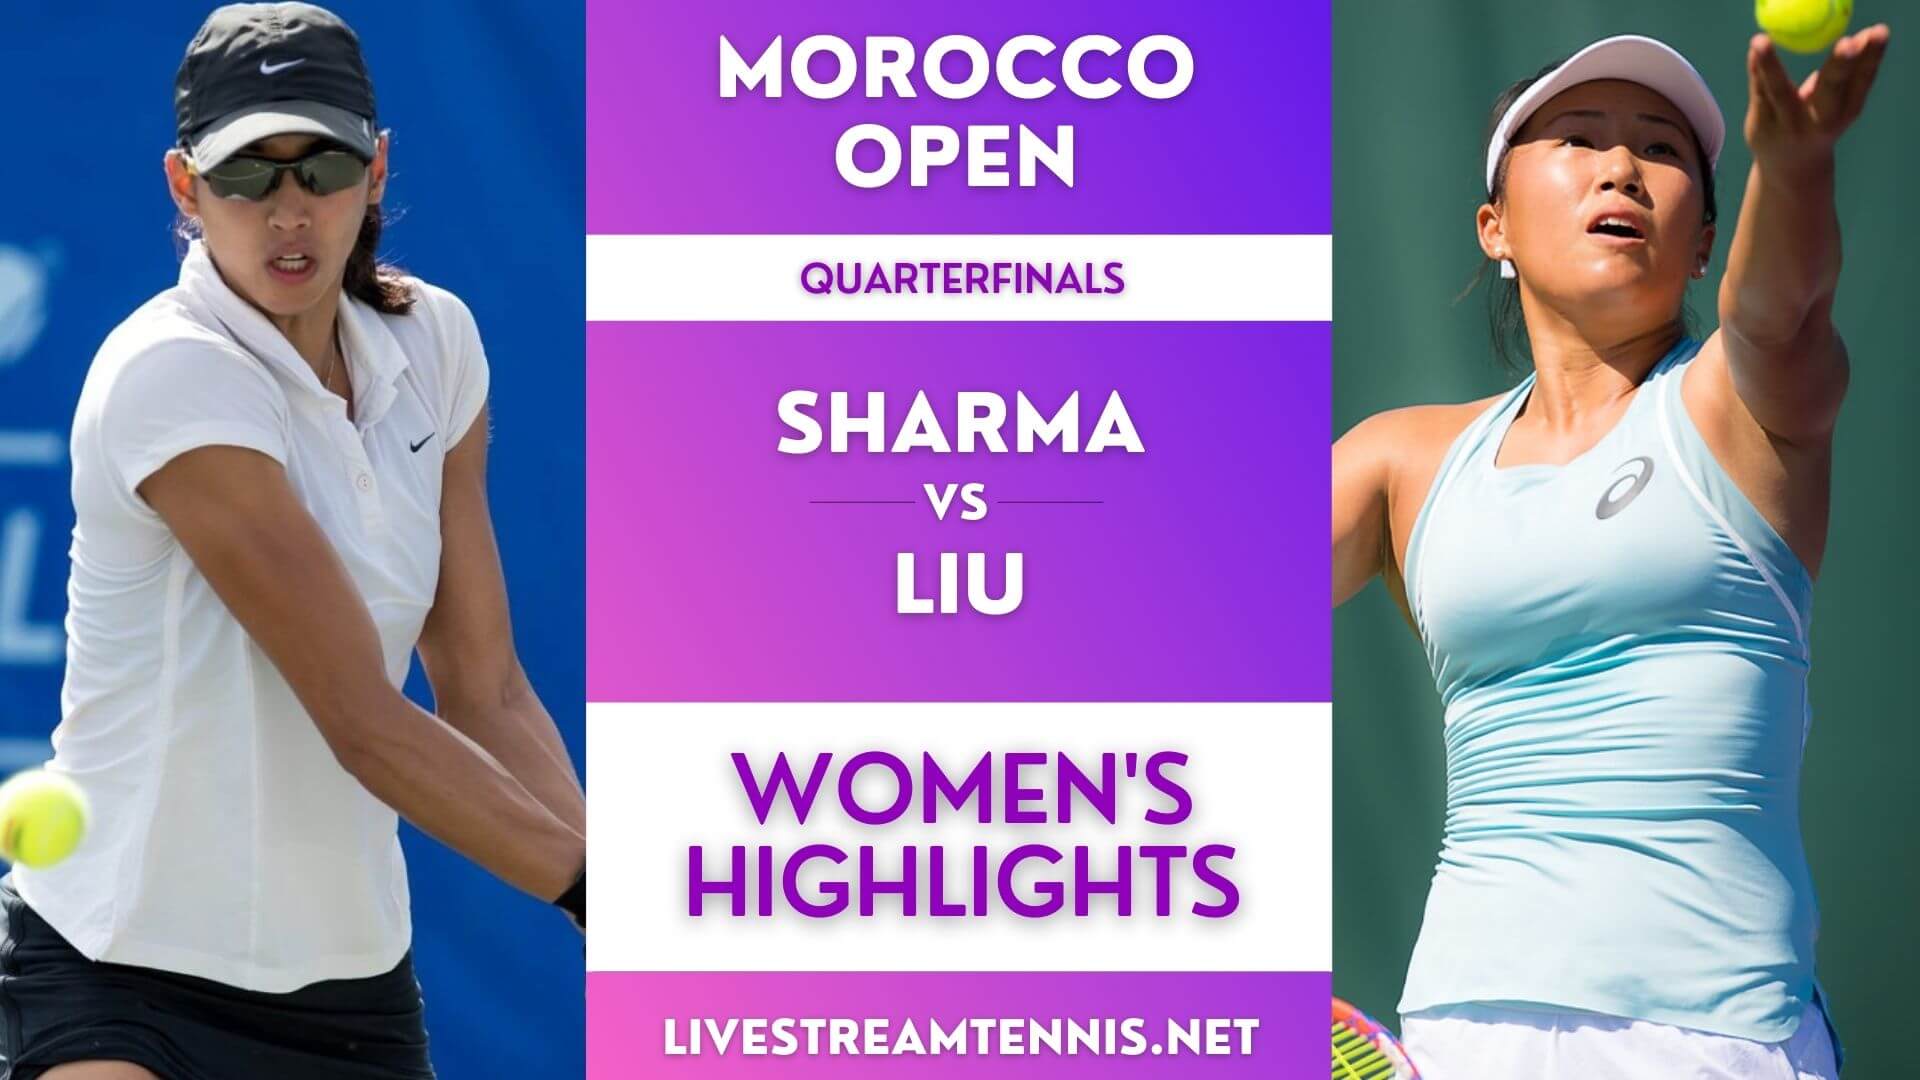 Morocco Open Ladies Quarterfinal 2 Highlights 2022